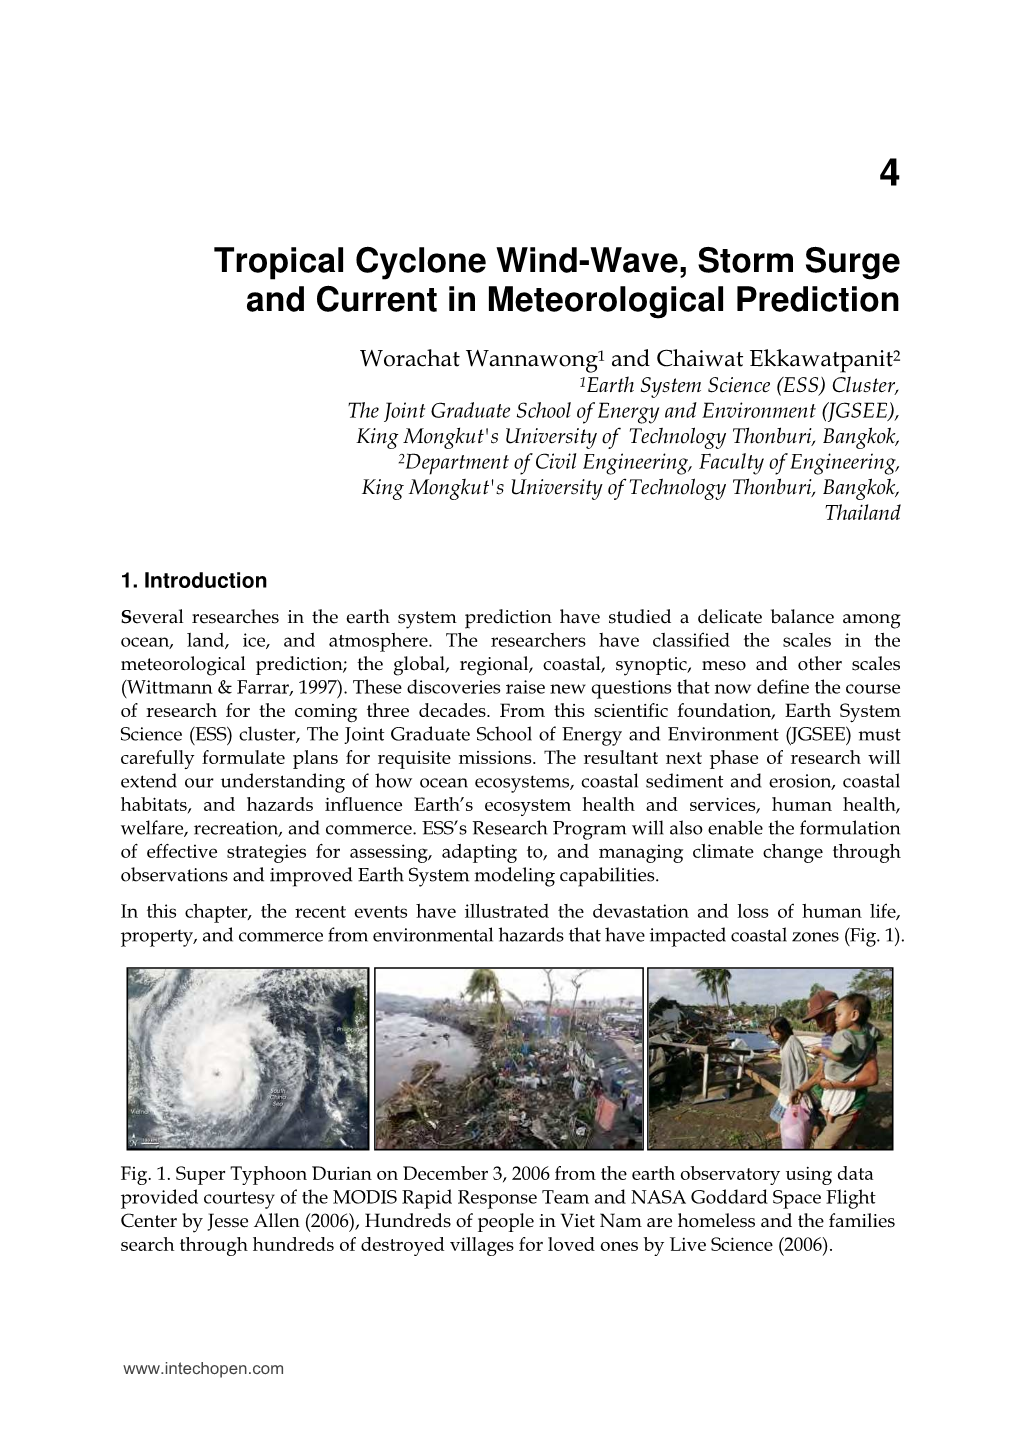 Tropical Cyclone Wind-Wave, Storm Surge and Current in Meteorological Prediction